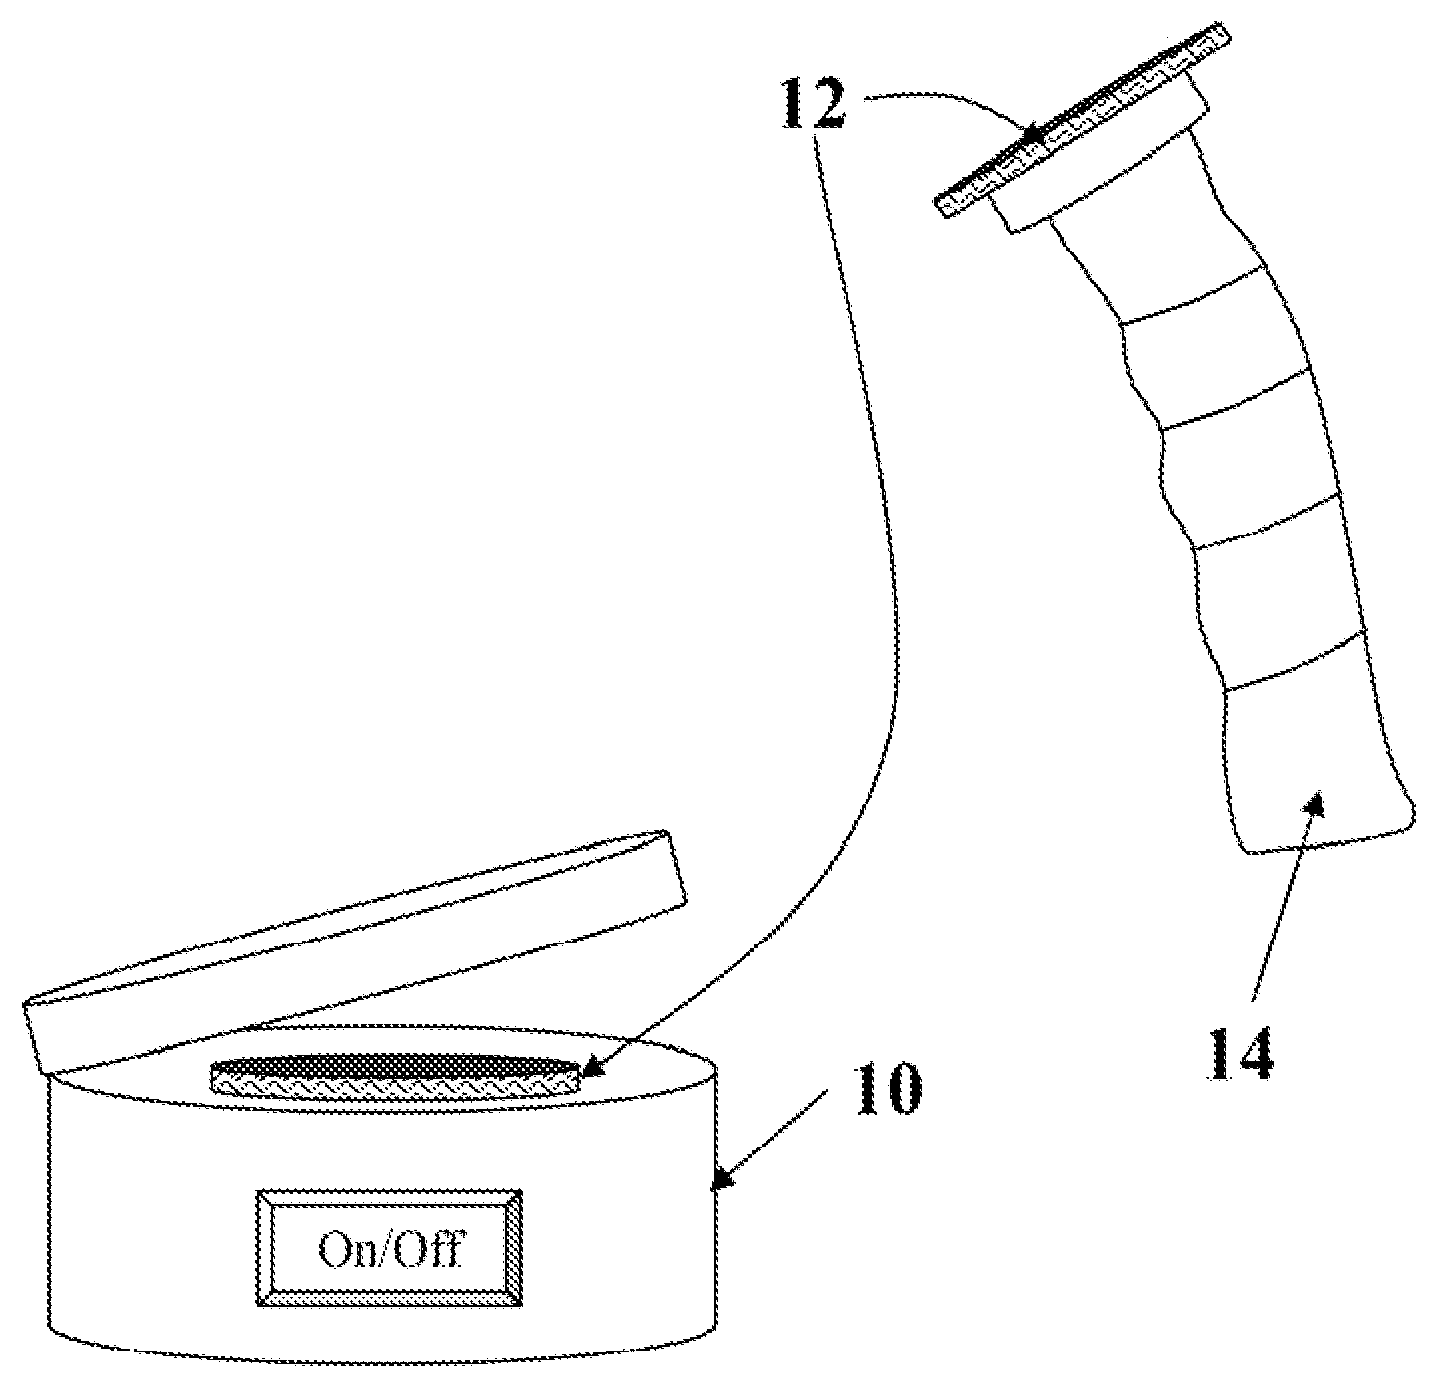 Thermal personal care systems and methods